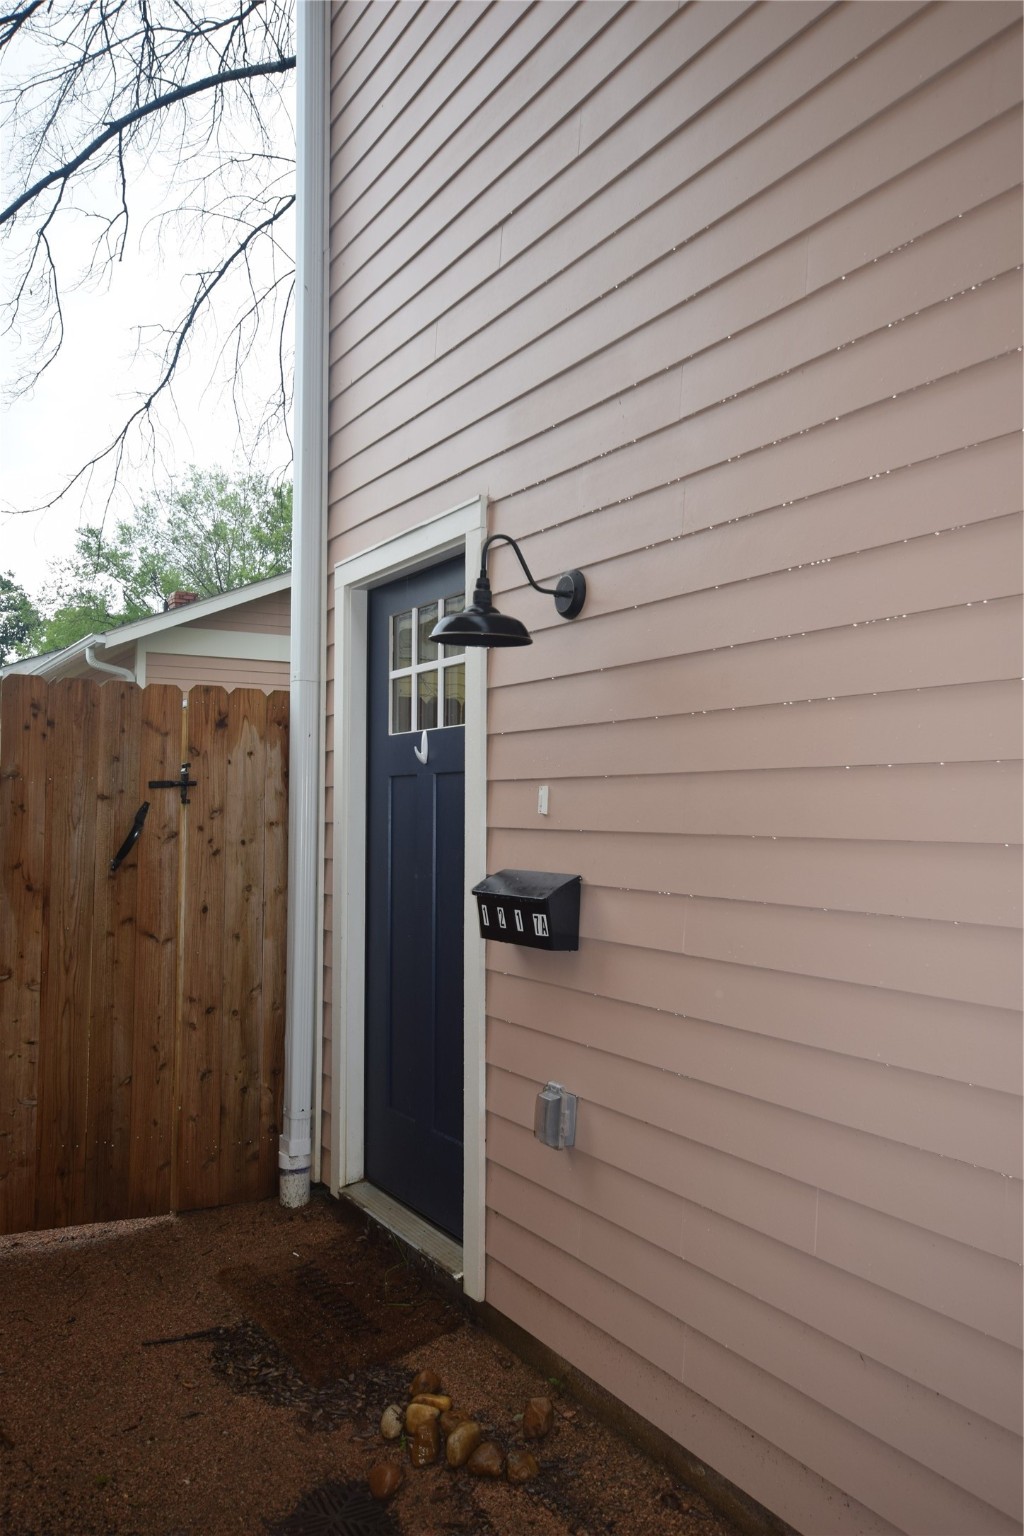 Garage apartment boasts double entry into full laundry room from both backyard and private walkway running from Tulane to Alley.  Walk upstairs to the 2nd floor garage apartment.